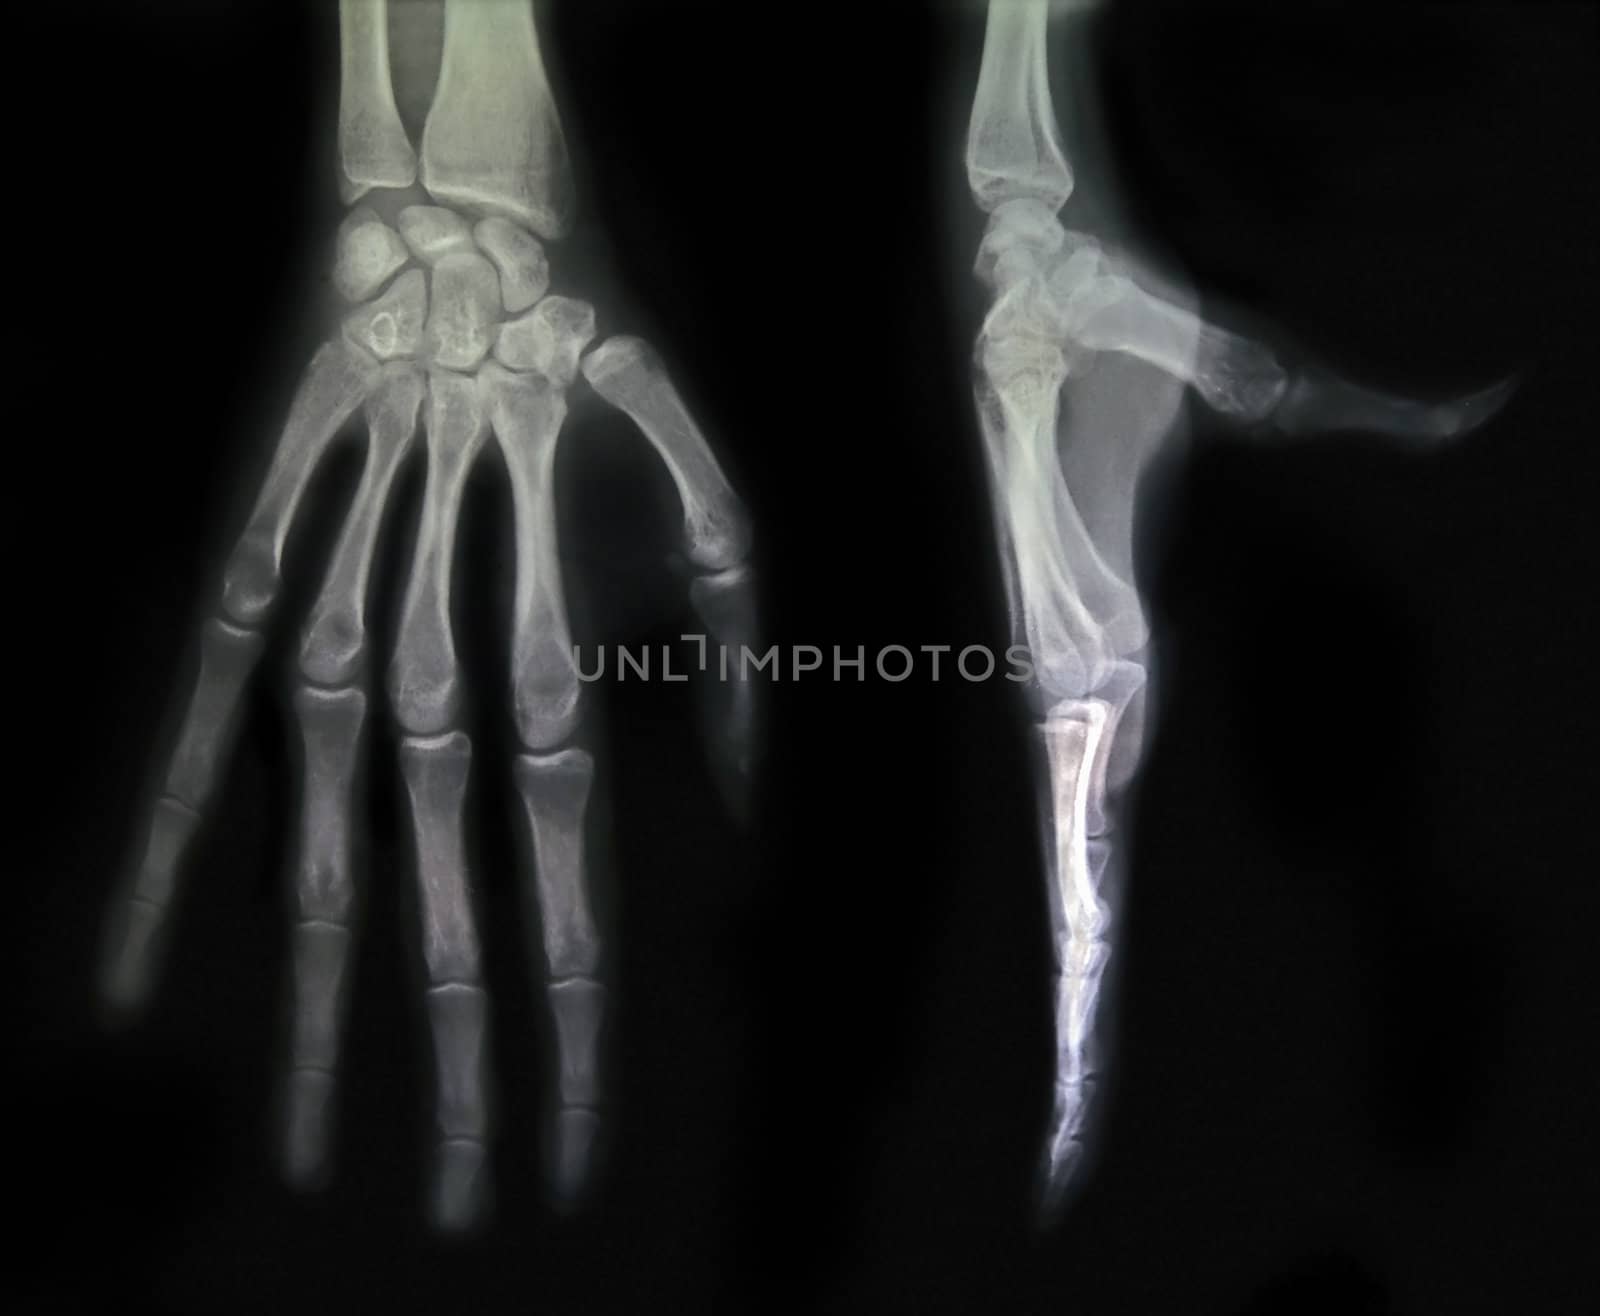 Two views of a hand in an x-ray.